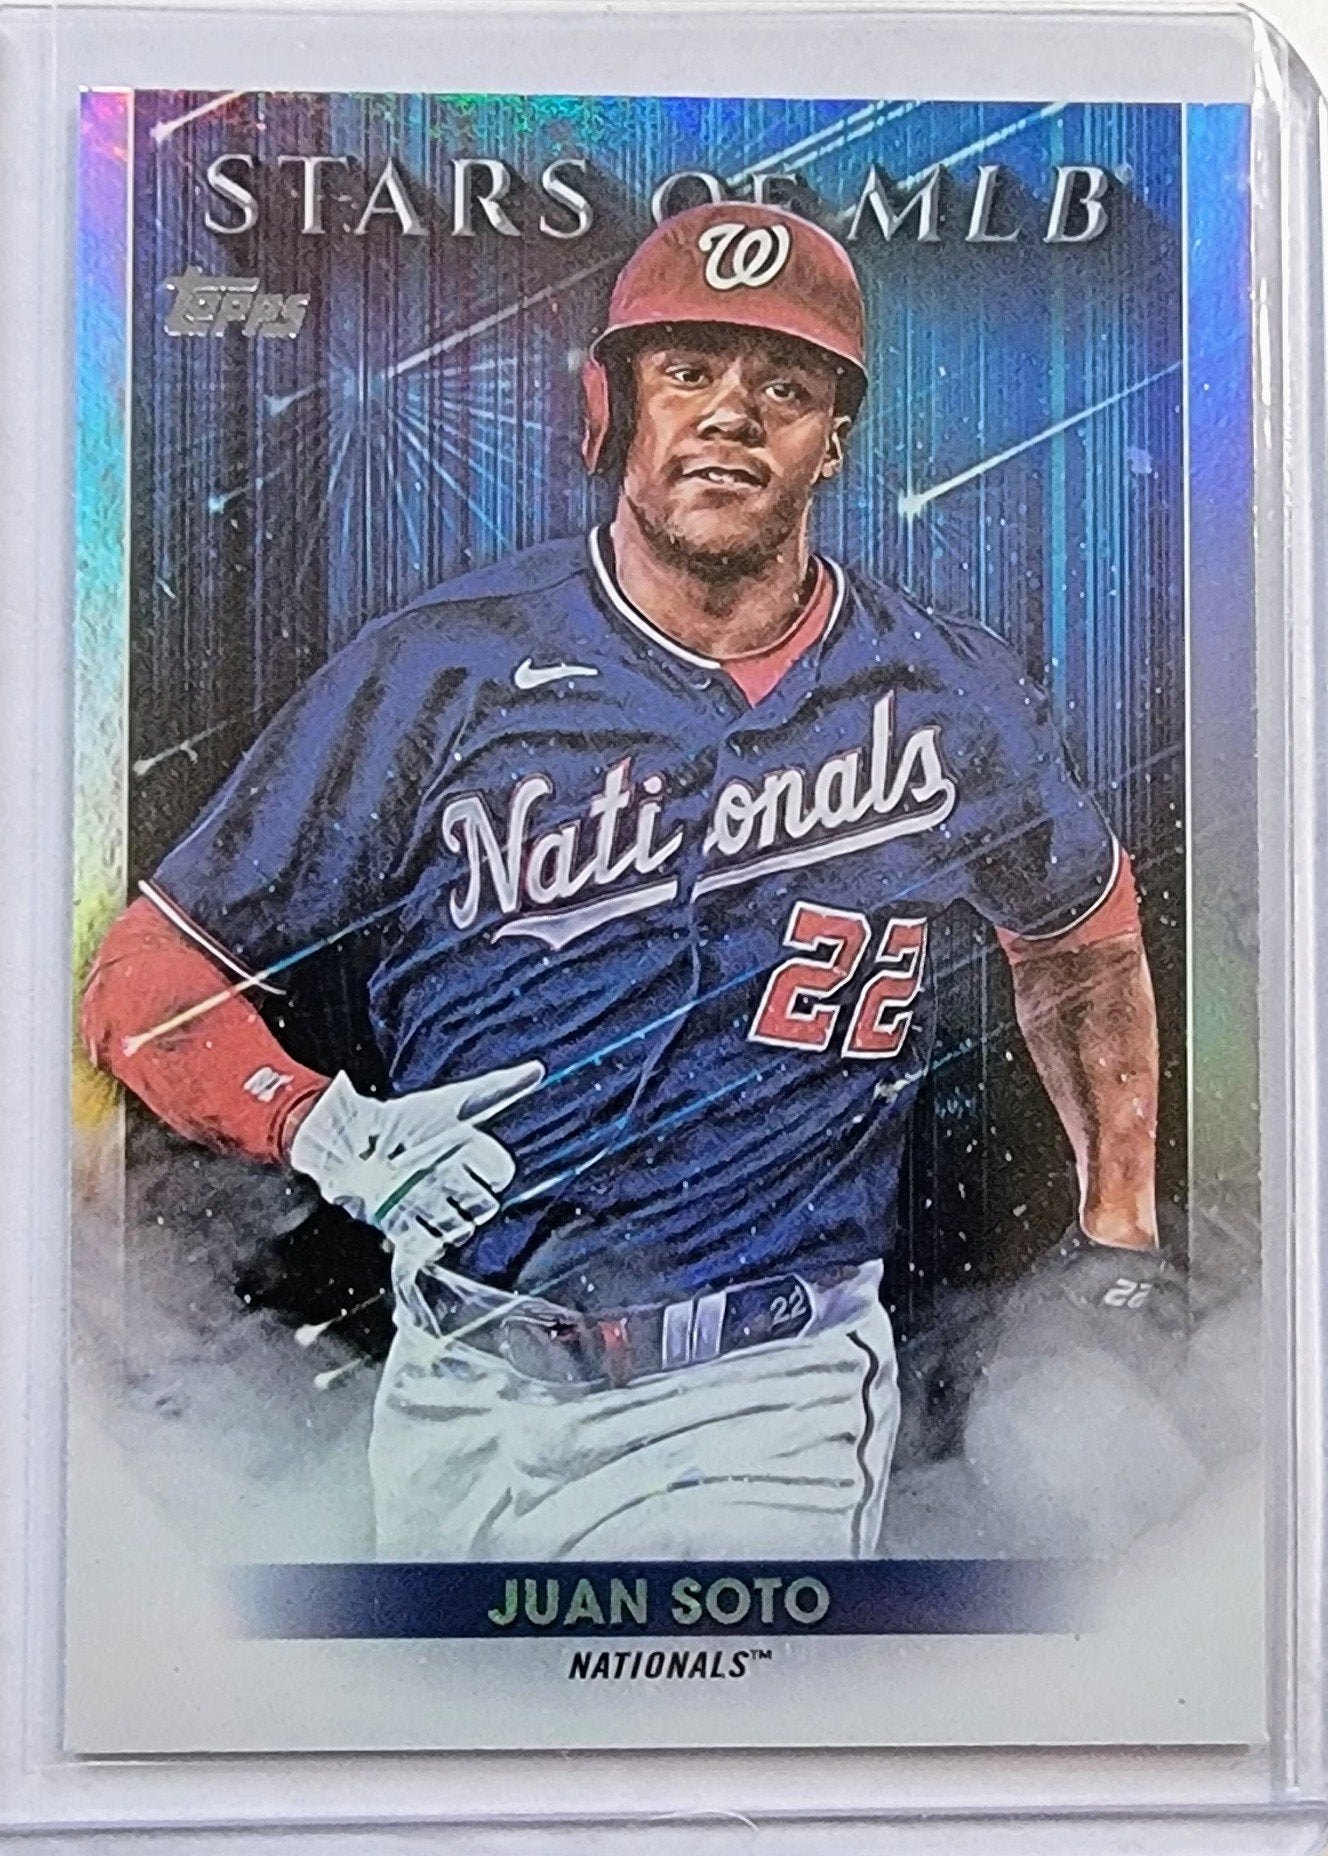 2022 Topps Juan Soto Stars of the MLB Foil Insert abaseball Card AVM1 simple Xclusive Collectibles   